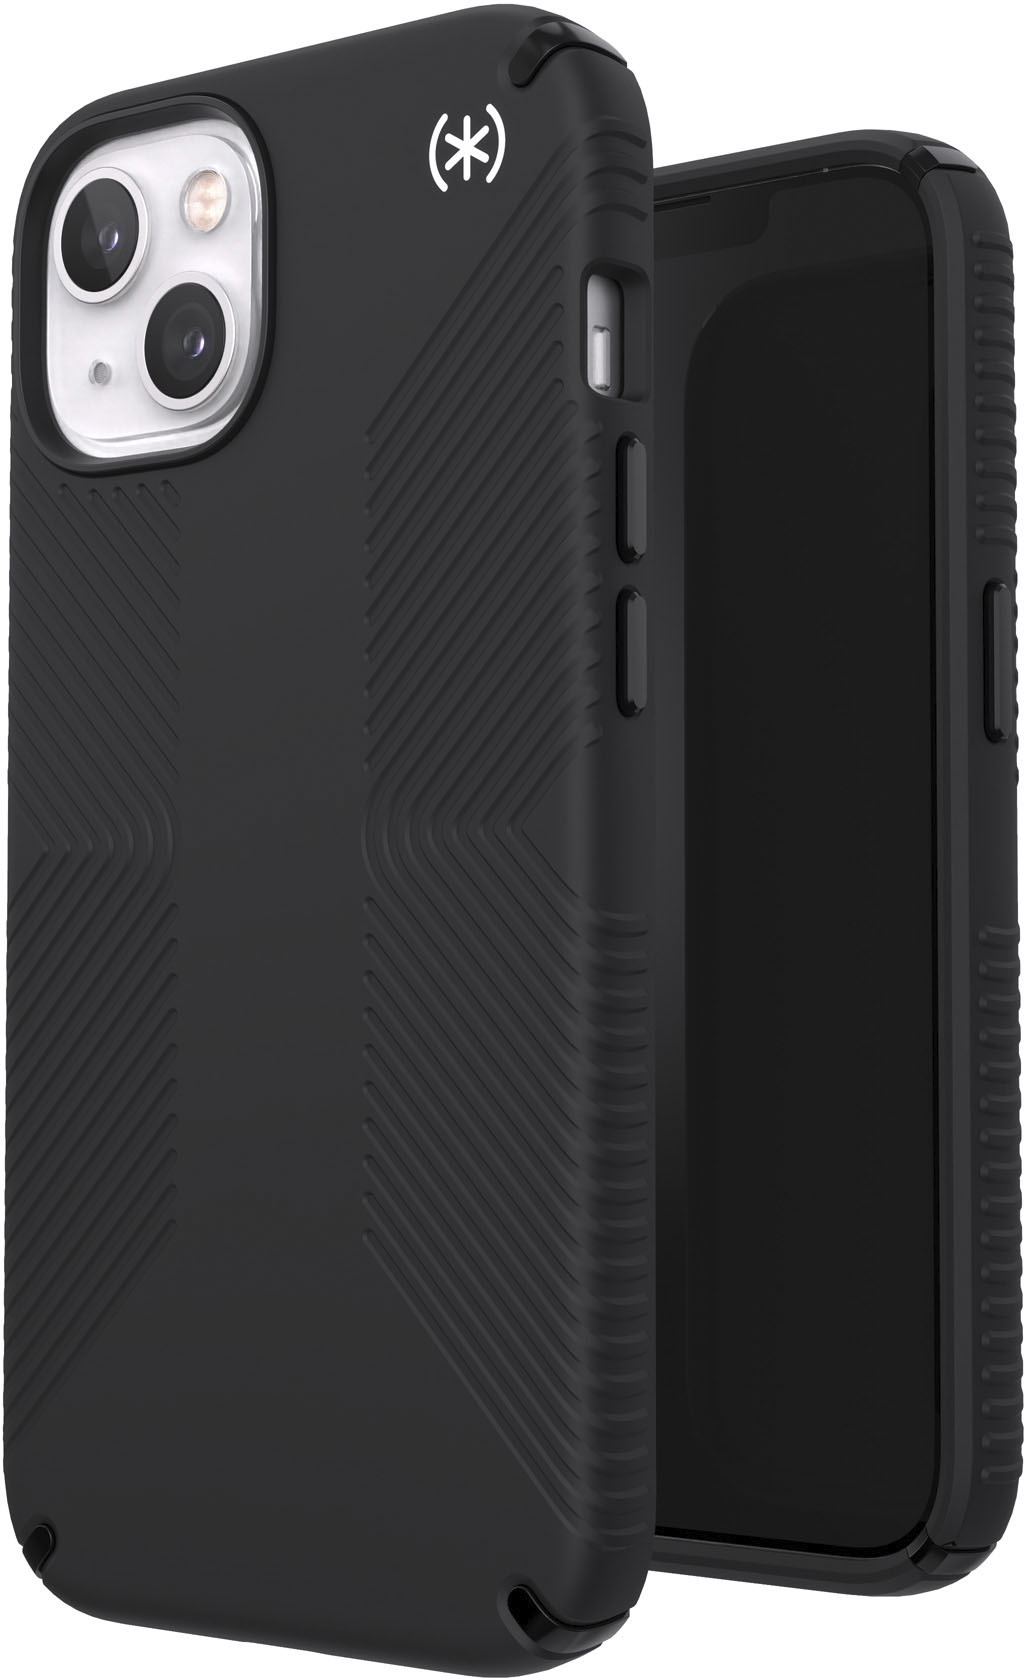 Heavy Duty Shockproof Cover Full-Body Armor Protective Defender Case for iPhone 11 6.1inch Black/Orange Althoa iPhone 11 Case 